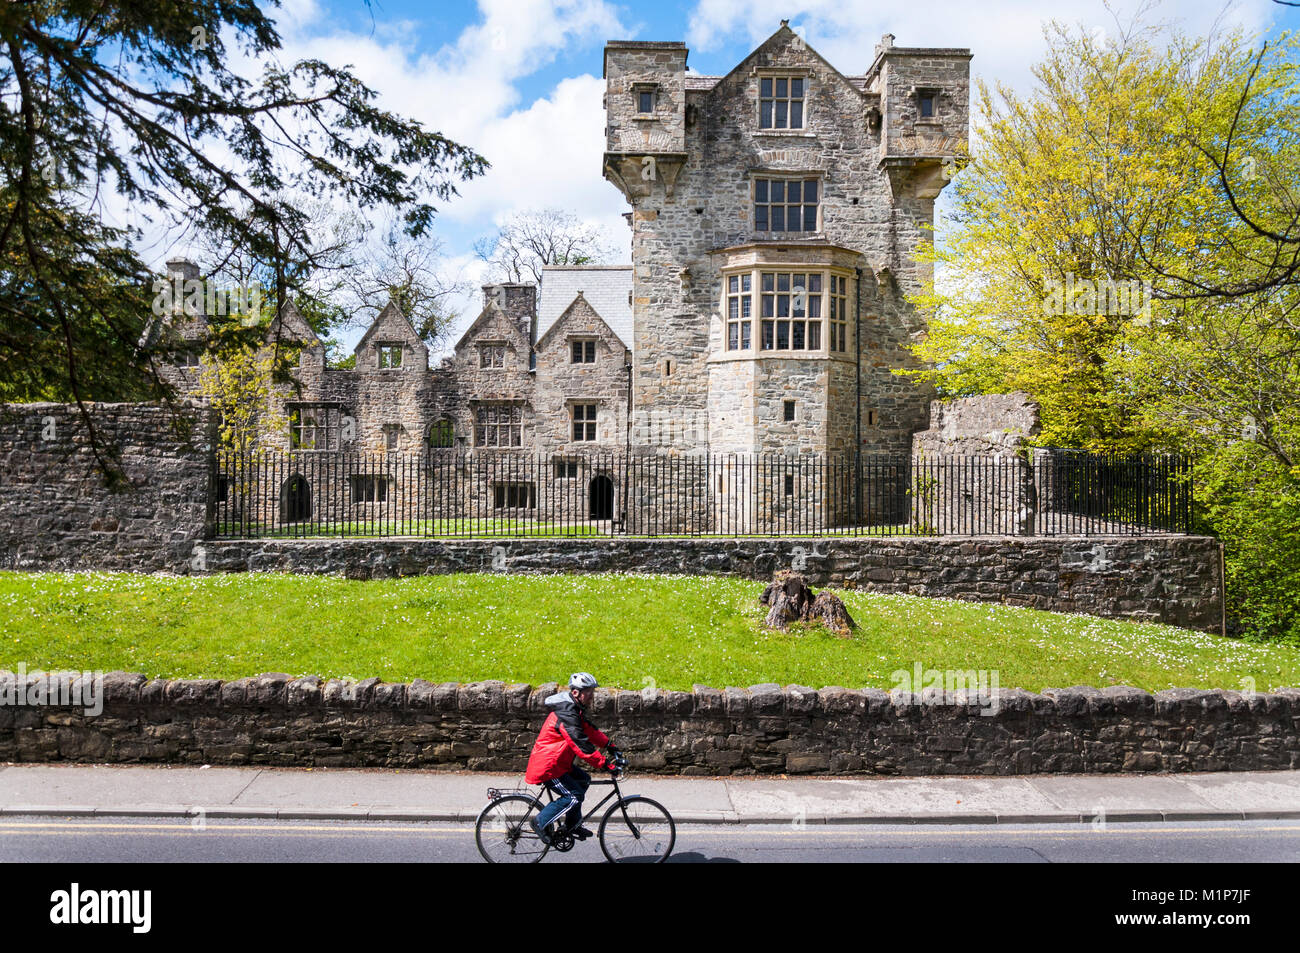 Donegal Castle and cyclist by River Eske, Donegal Town, Ireland Stock Photo